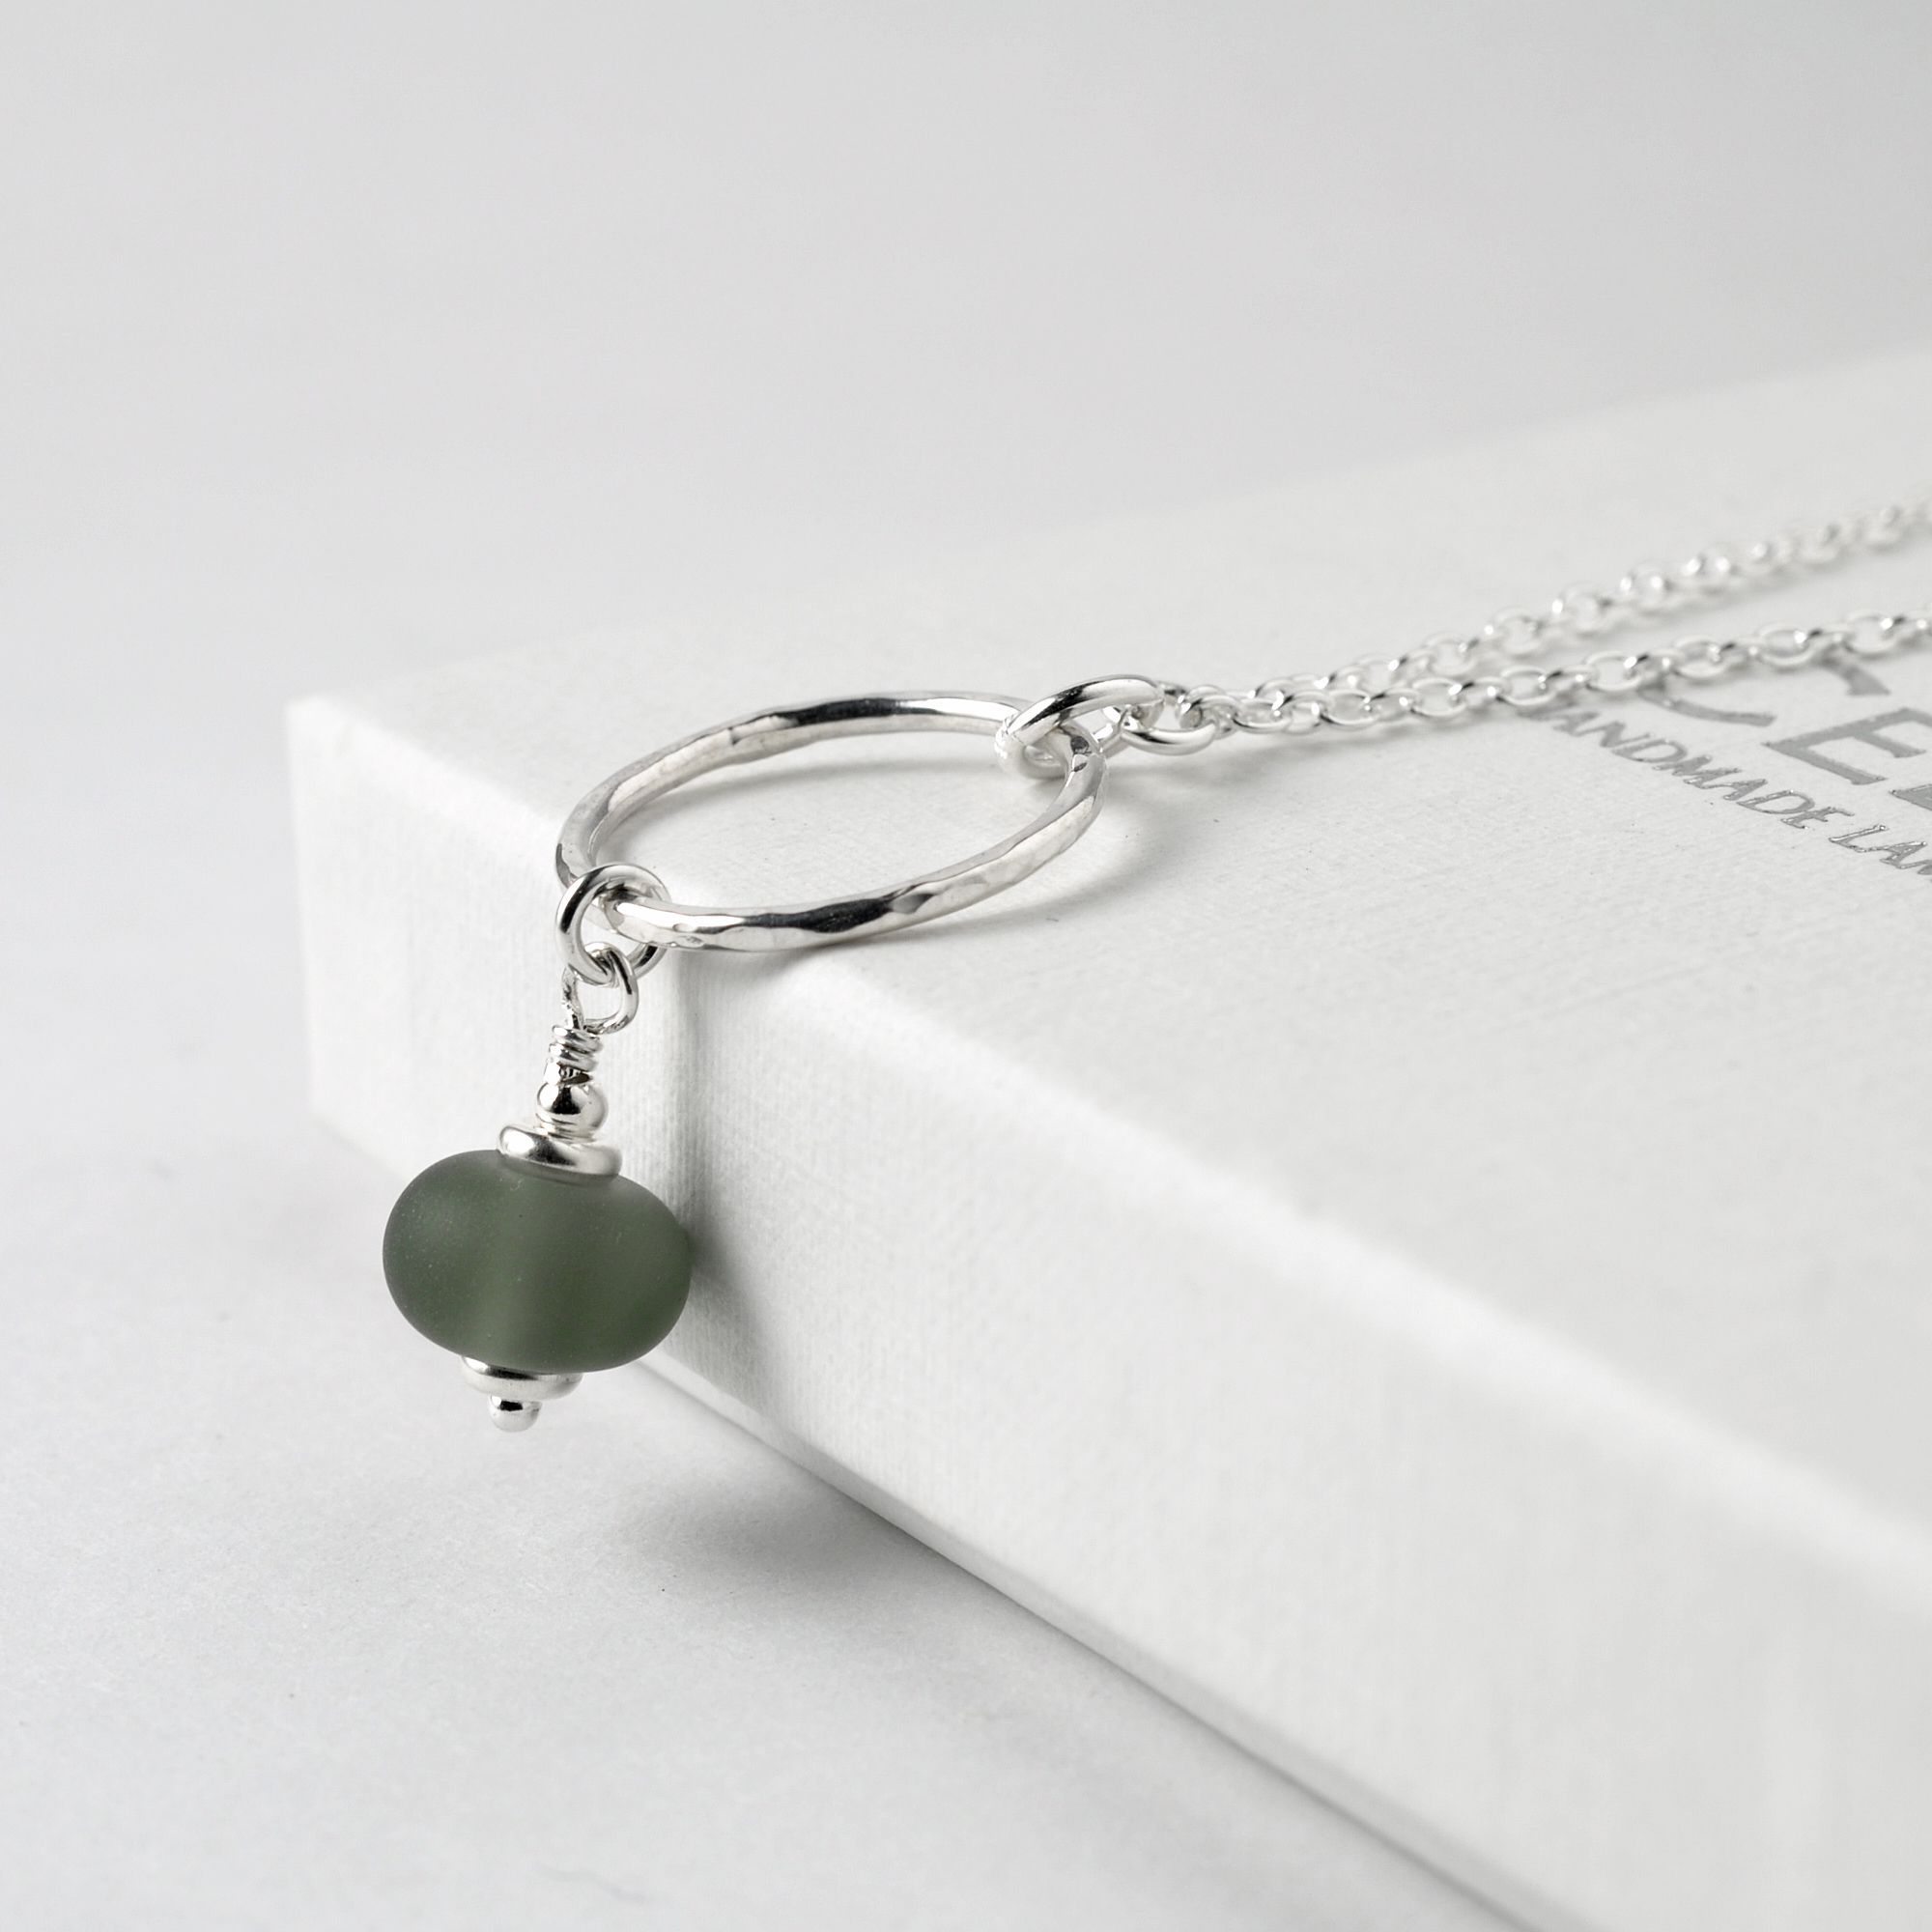 A slate grey tumbled glass pendant handing from a silver hoop on a necklace